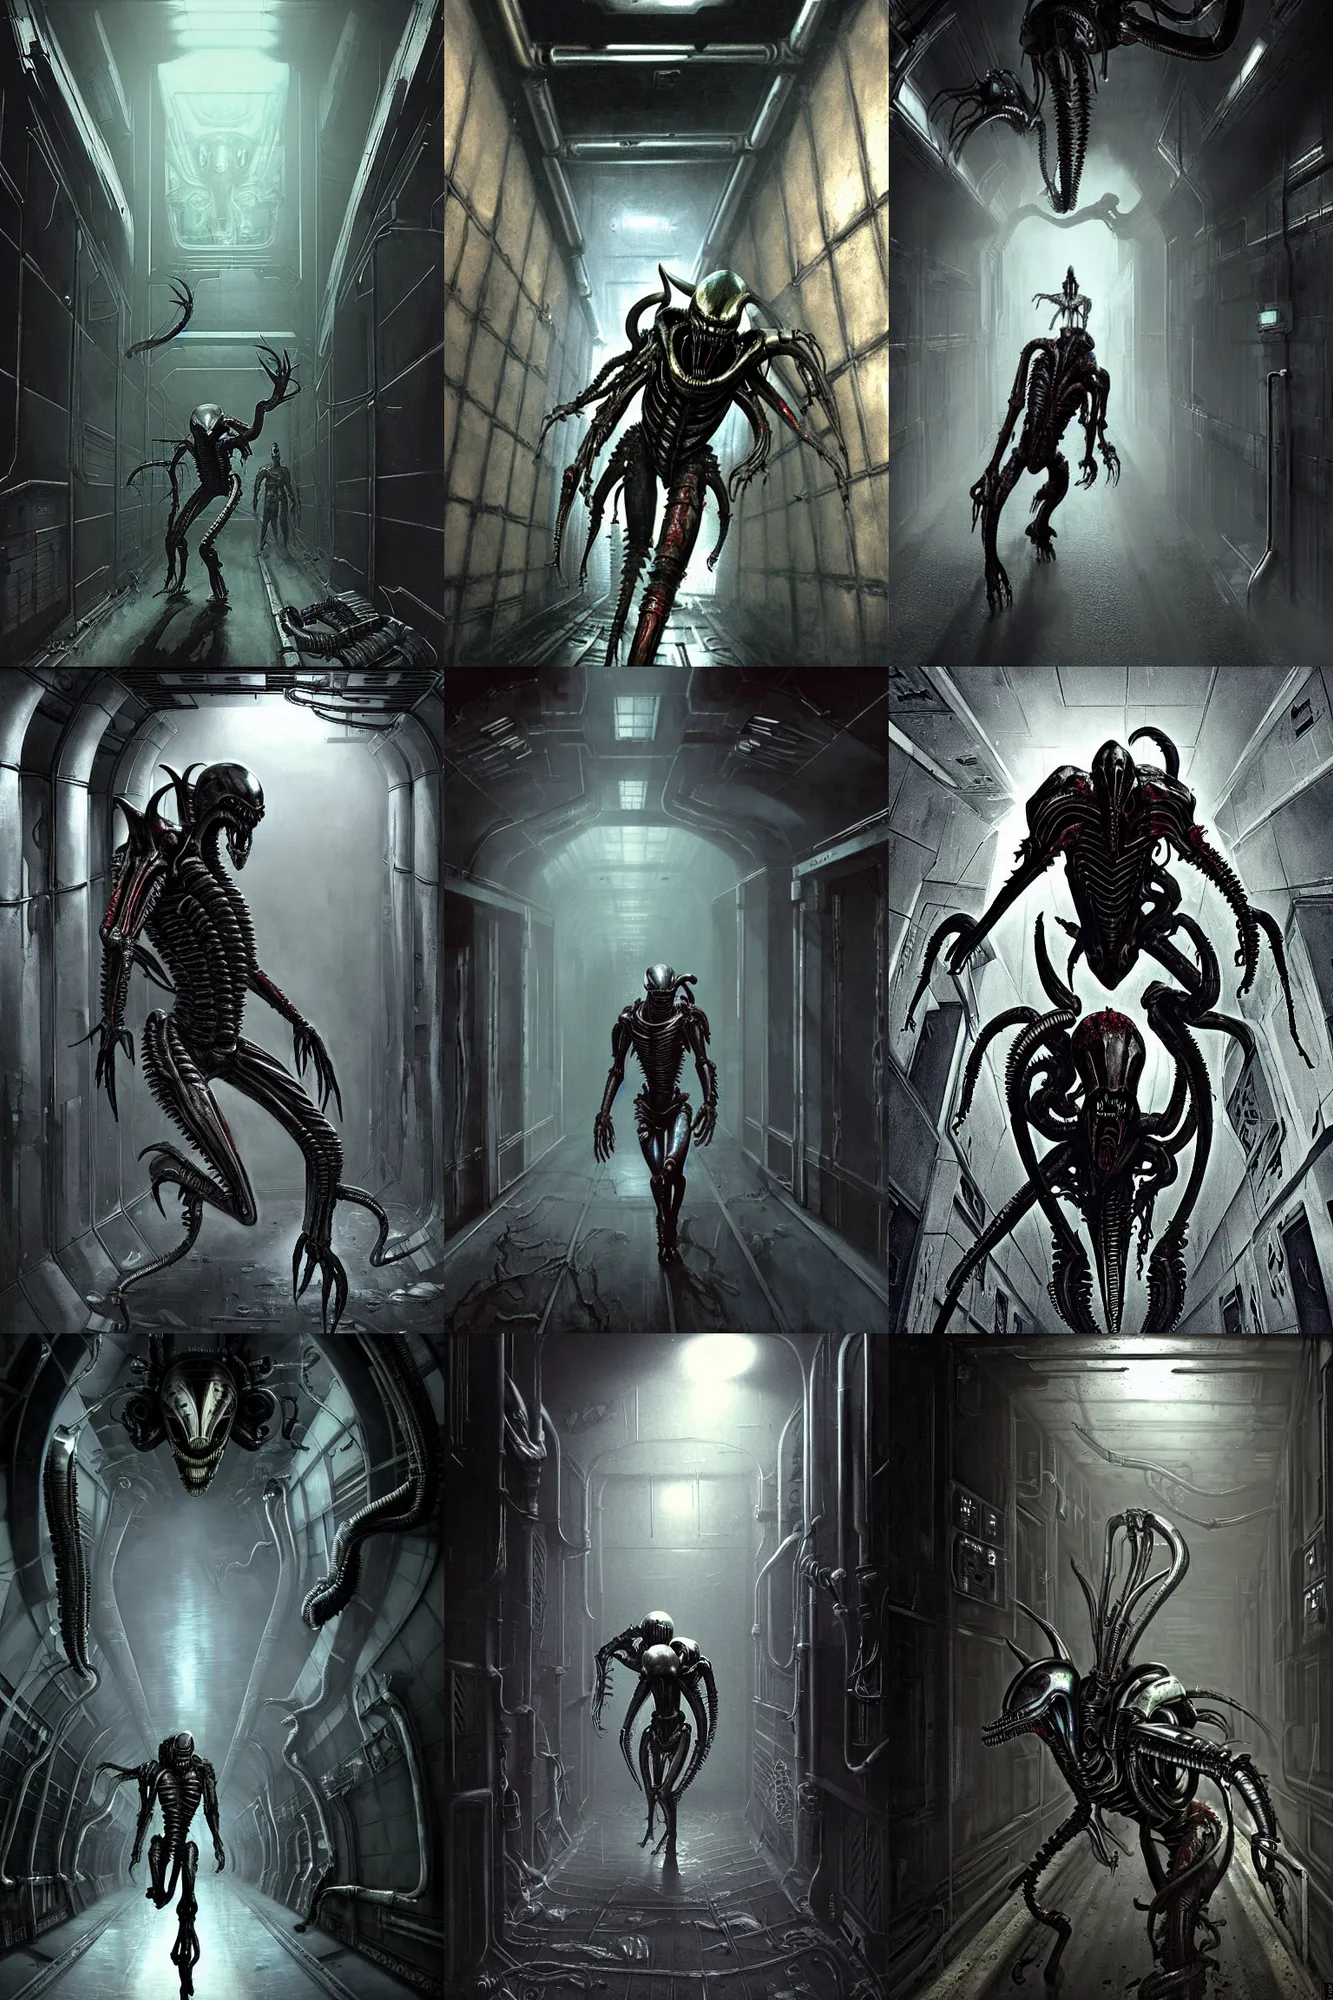 Prompt: horror movie scene of someone in futuristic armor being chased down a hallway, xenomorph from alien chasing someone, rusty metal walls, broken pipes, dark colors, muted colors, tense atmosphere, mist floats in the air, amazing value control, dead space, moody colors, dramatic lighting, ussg ishimura, frank frazetta, h. r. giger